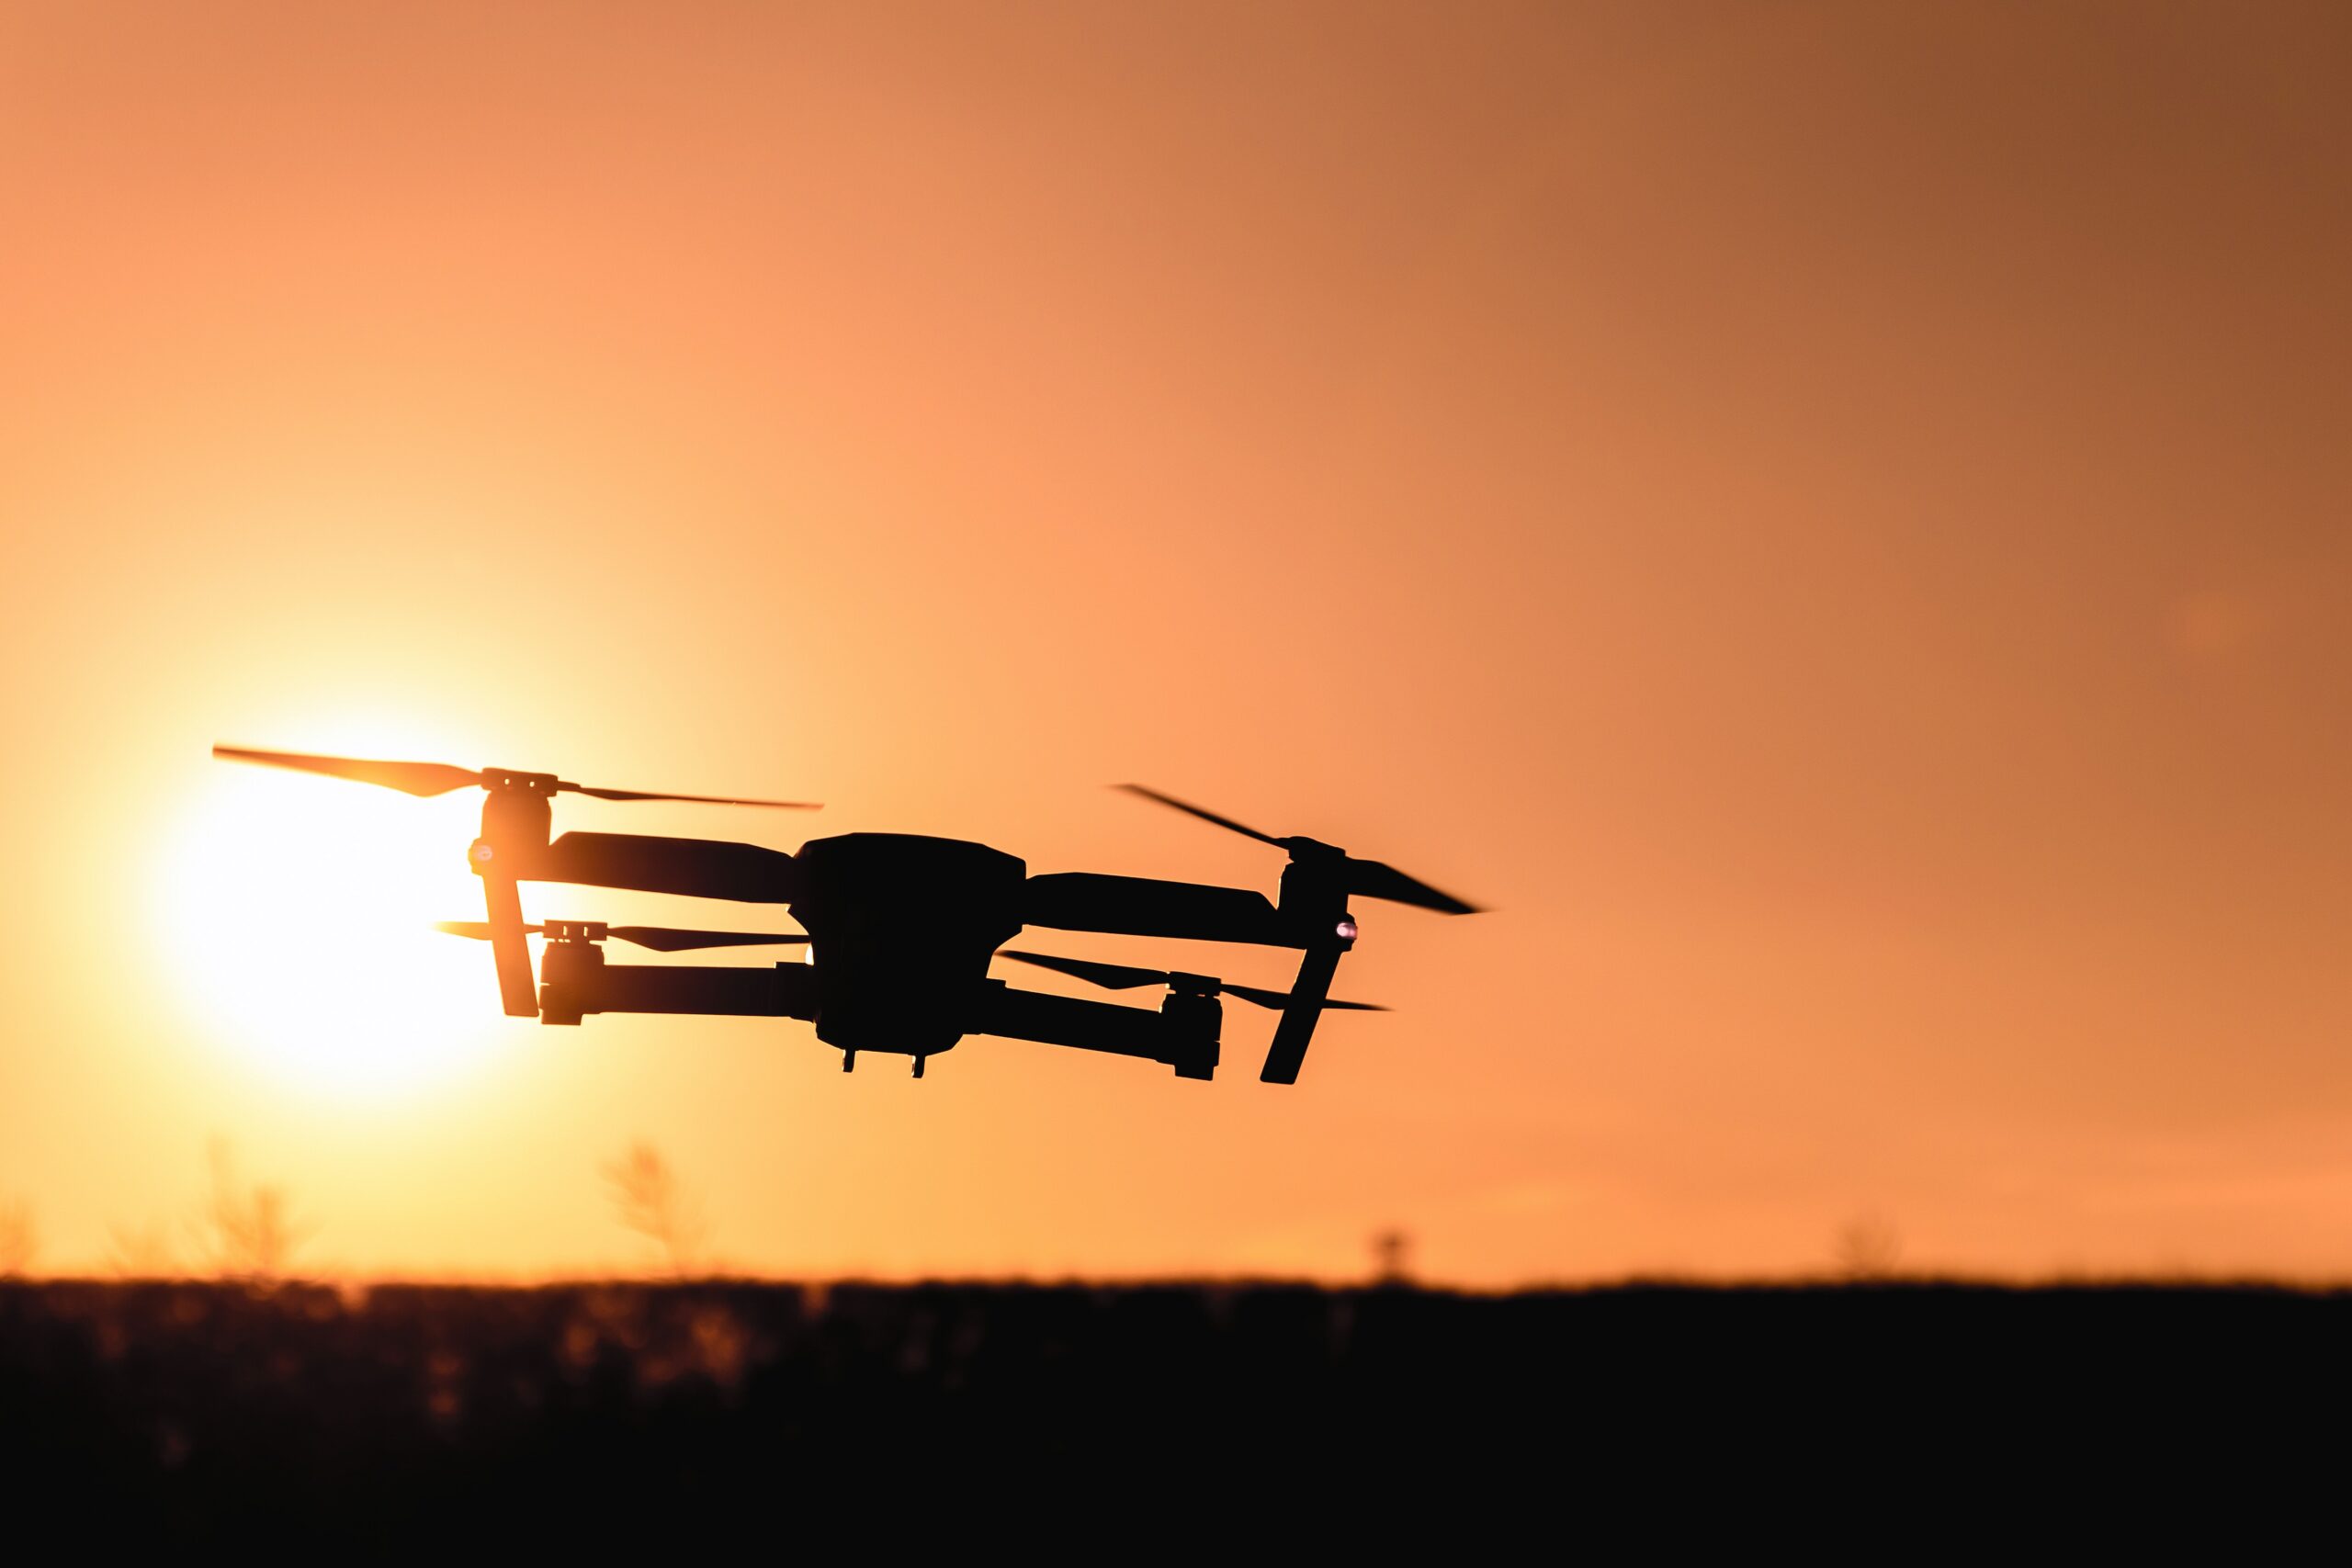 A drone flying in the sunset. Photo by JESHOOTS.com from Pexels